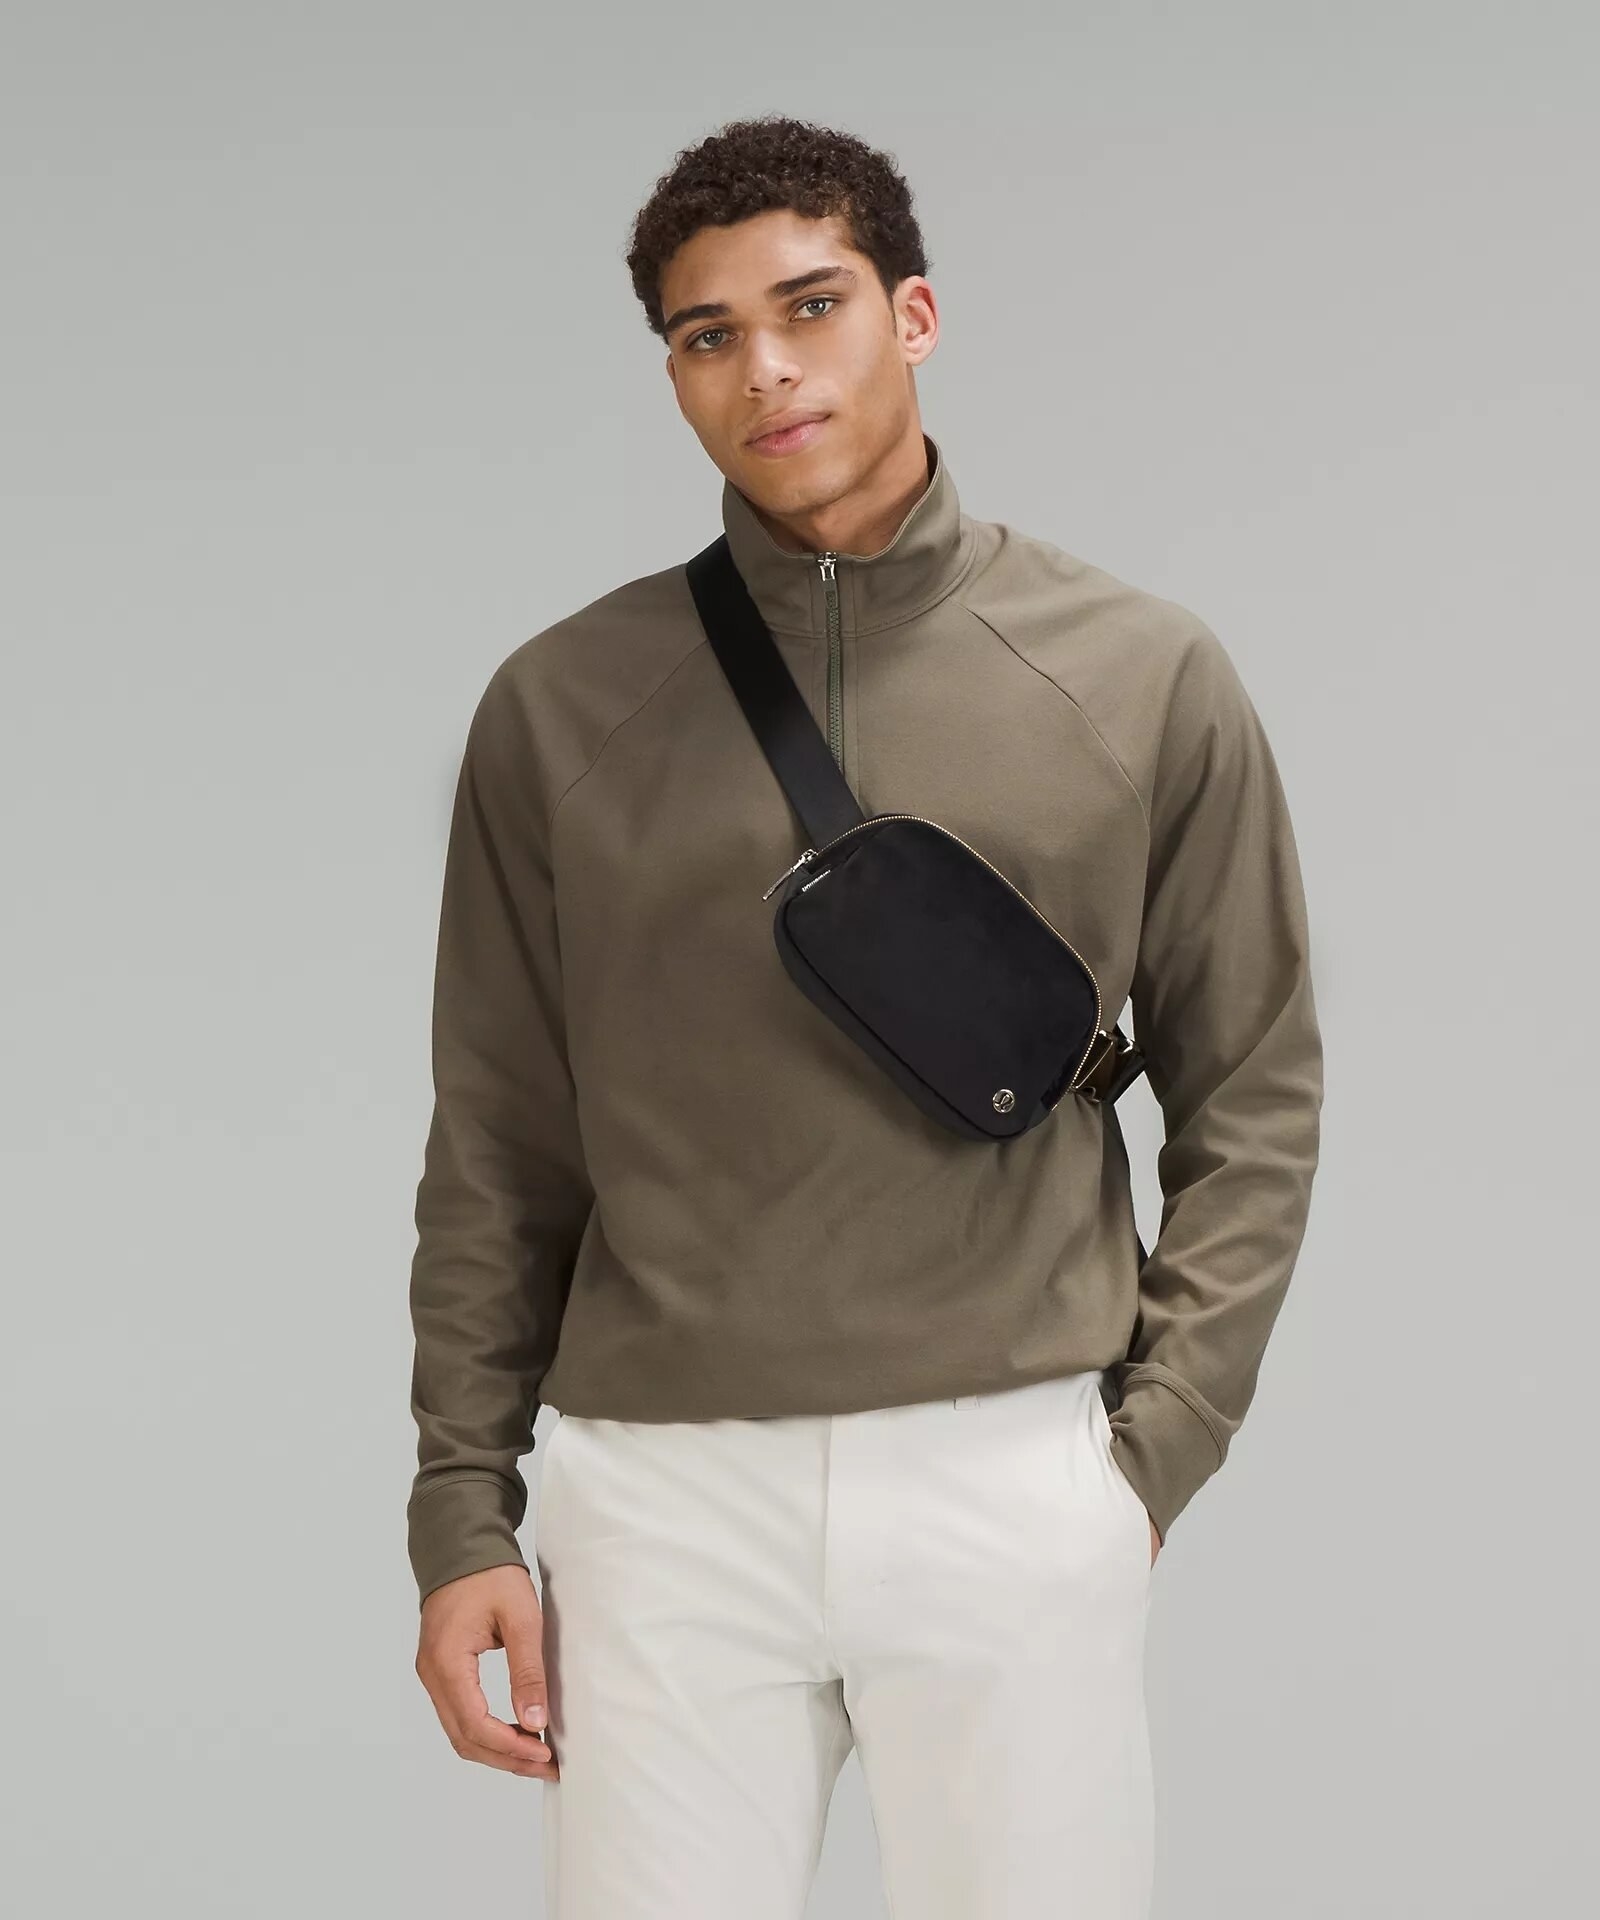 someone wearing the belt bag across their chest